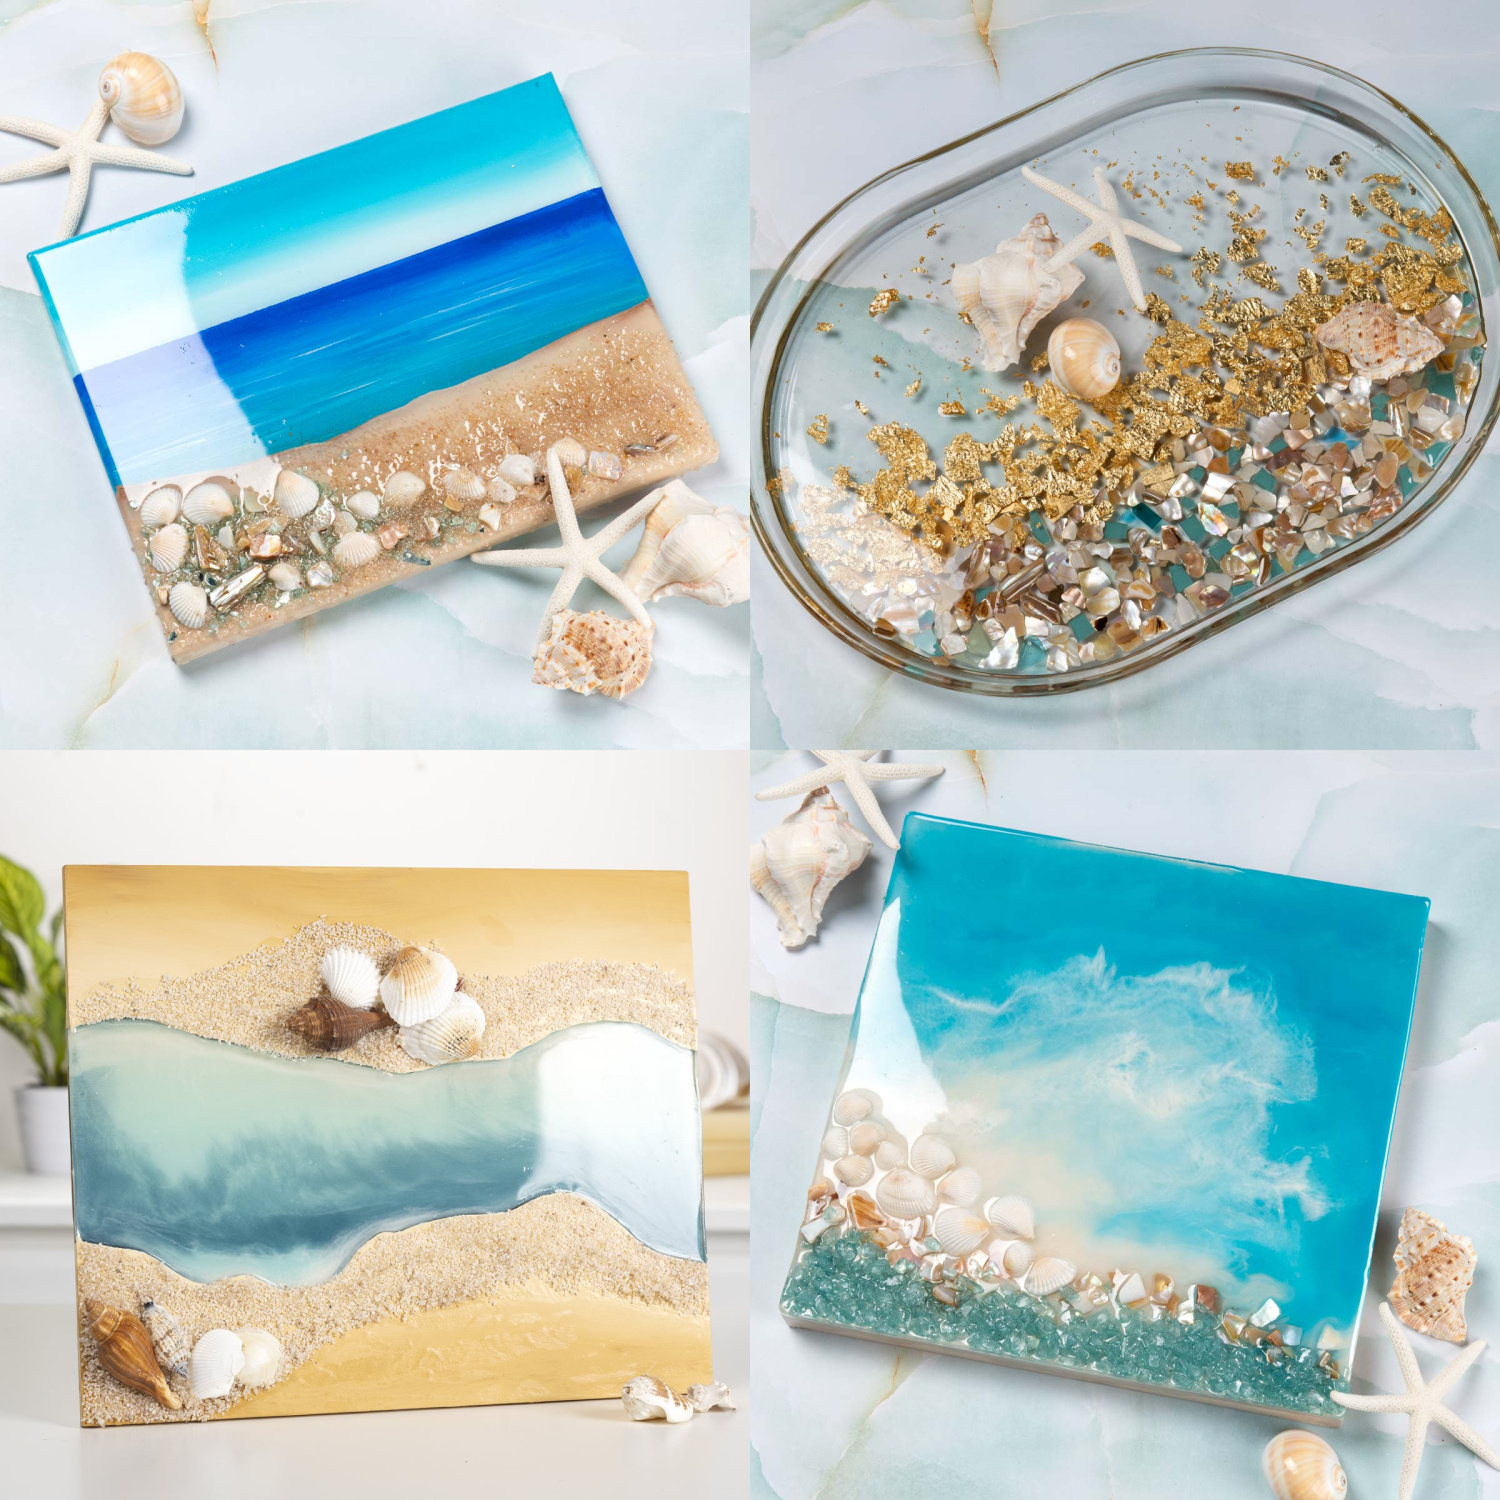 Resin Pour Ideas: Epoxy Resin Crafts Projects to DIY!